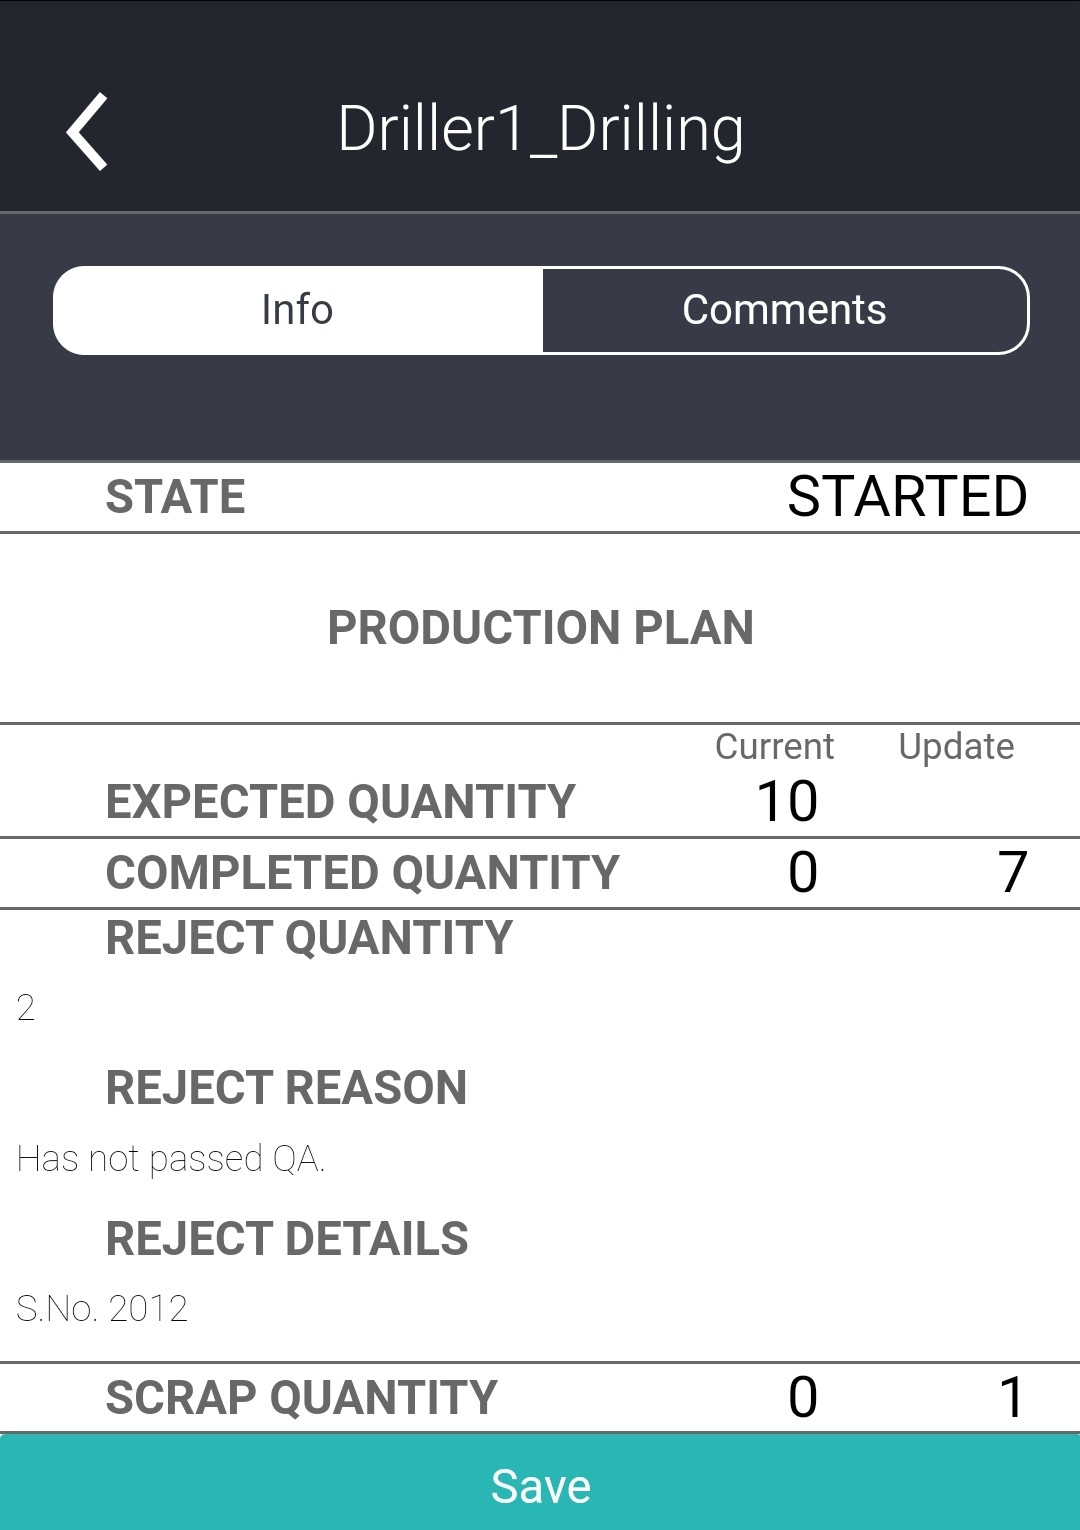 Updating Output Quantities Using the Mobile App